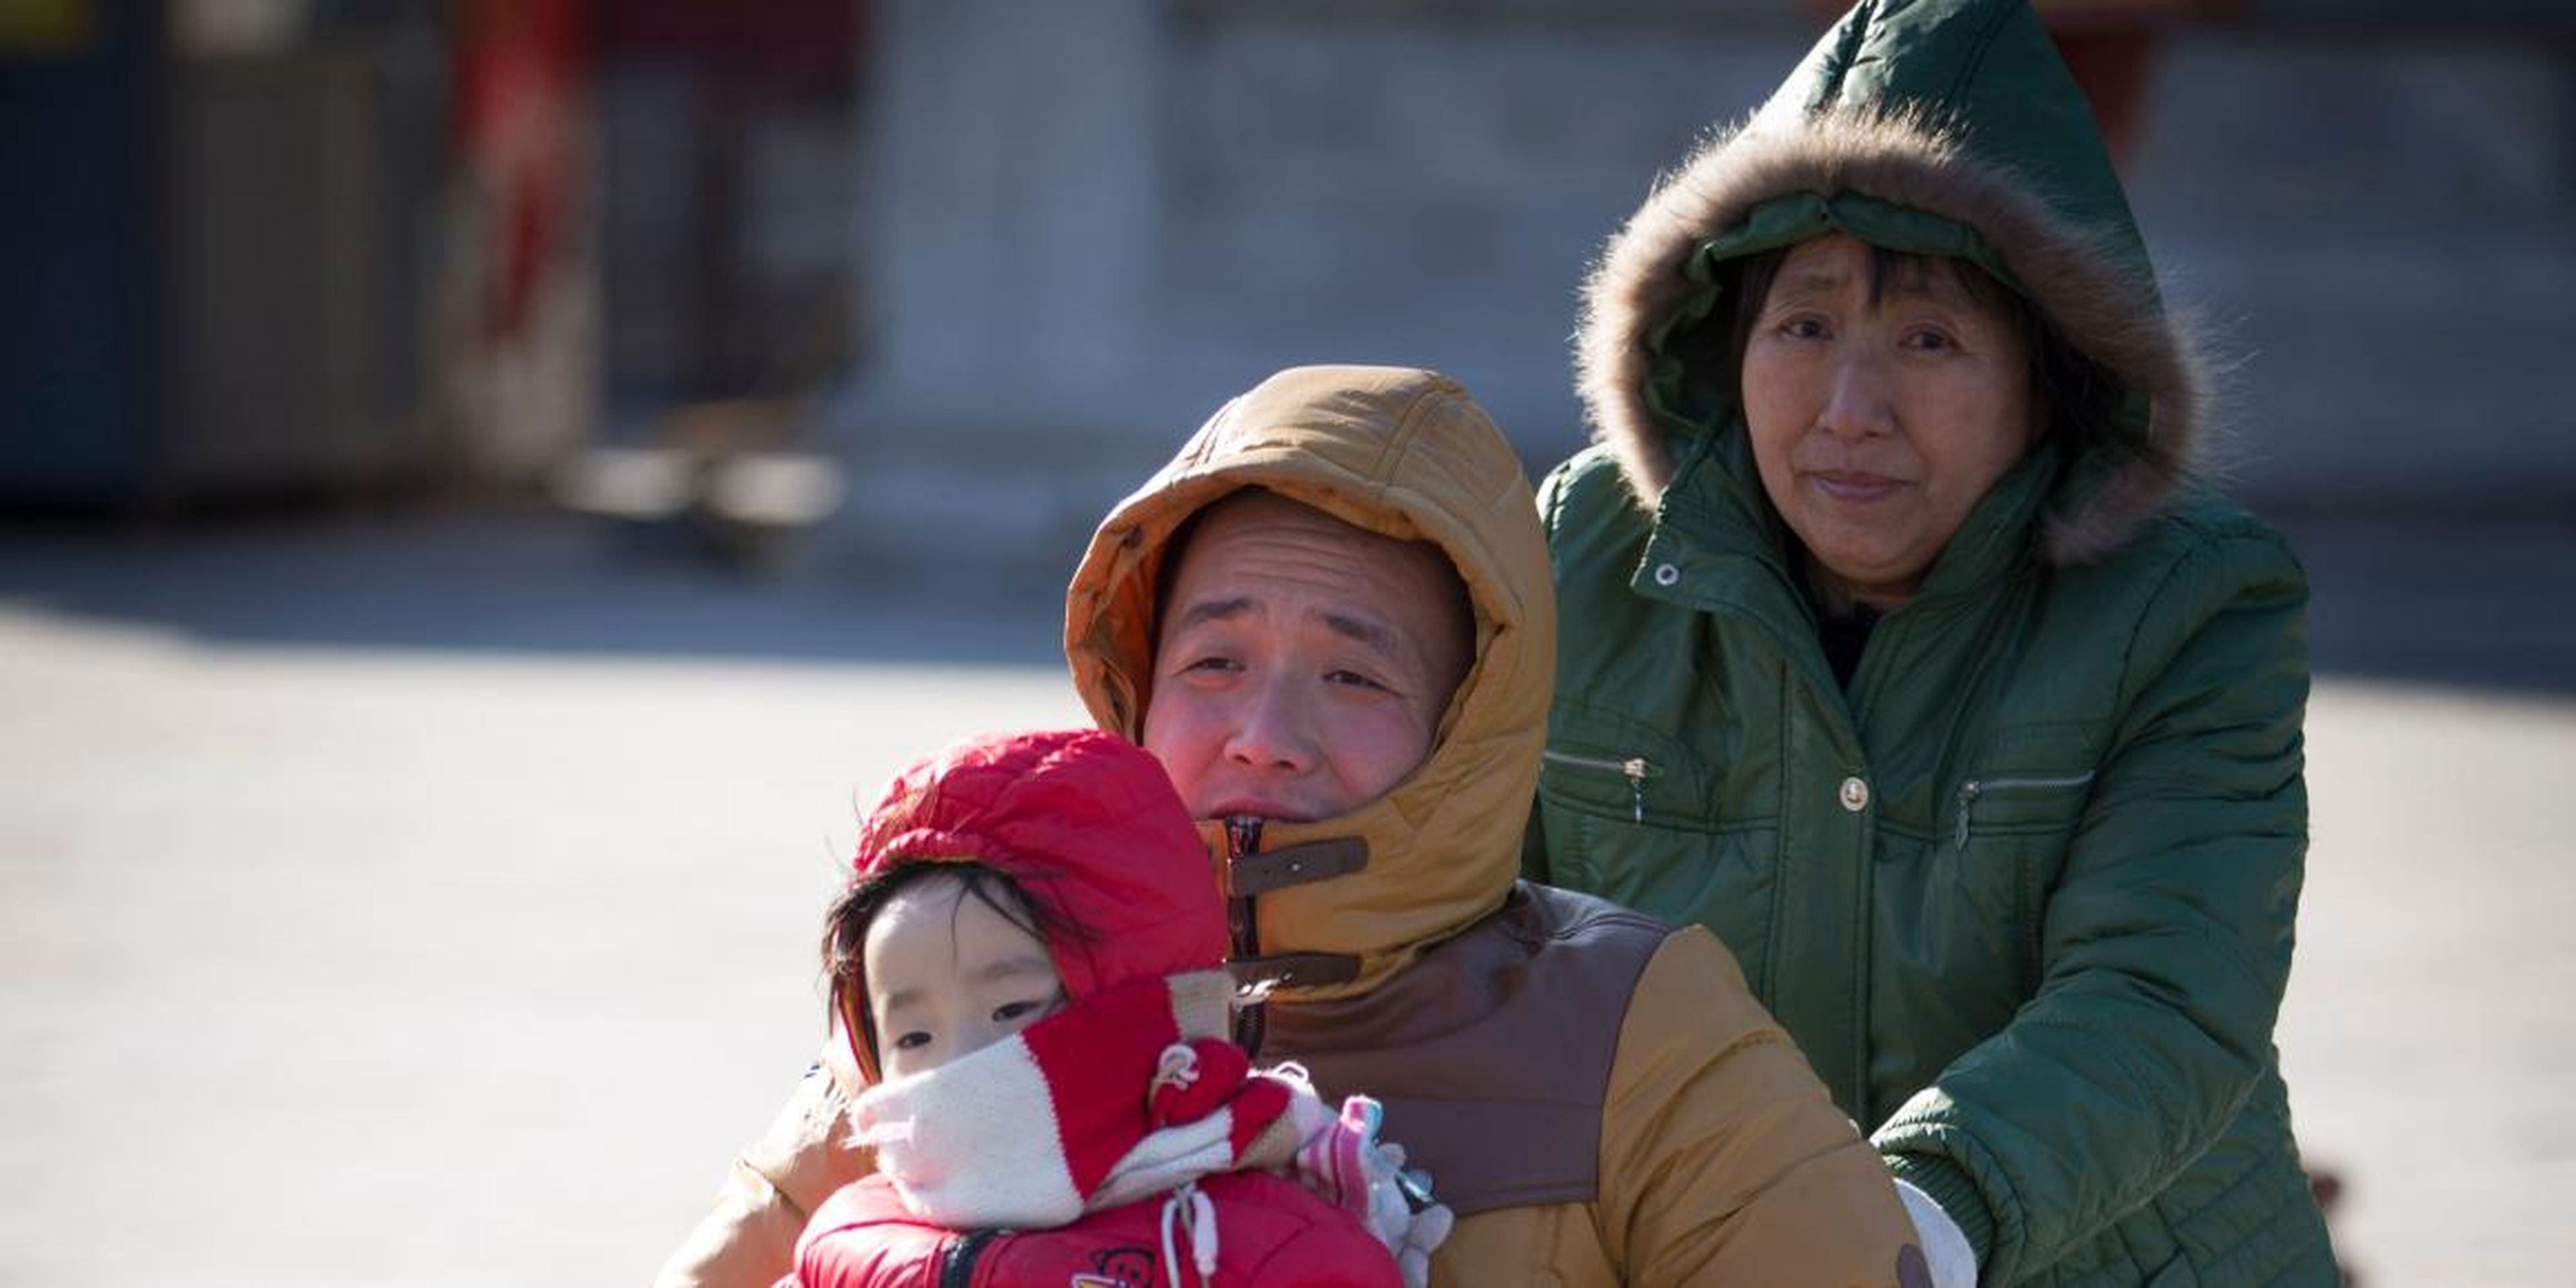 Chinese citizens spend time with their grandchild in Beijing in March 2014. Taking care of the elderly can get you good credit in some parts of China.